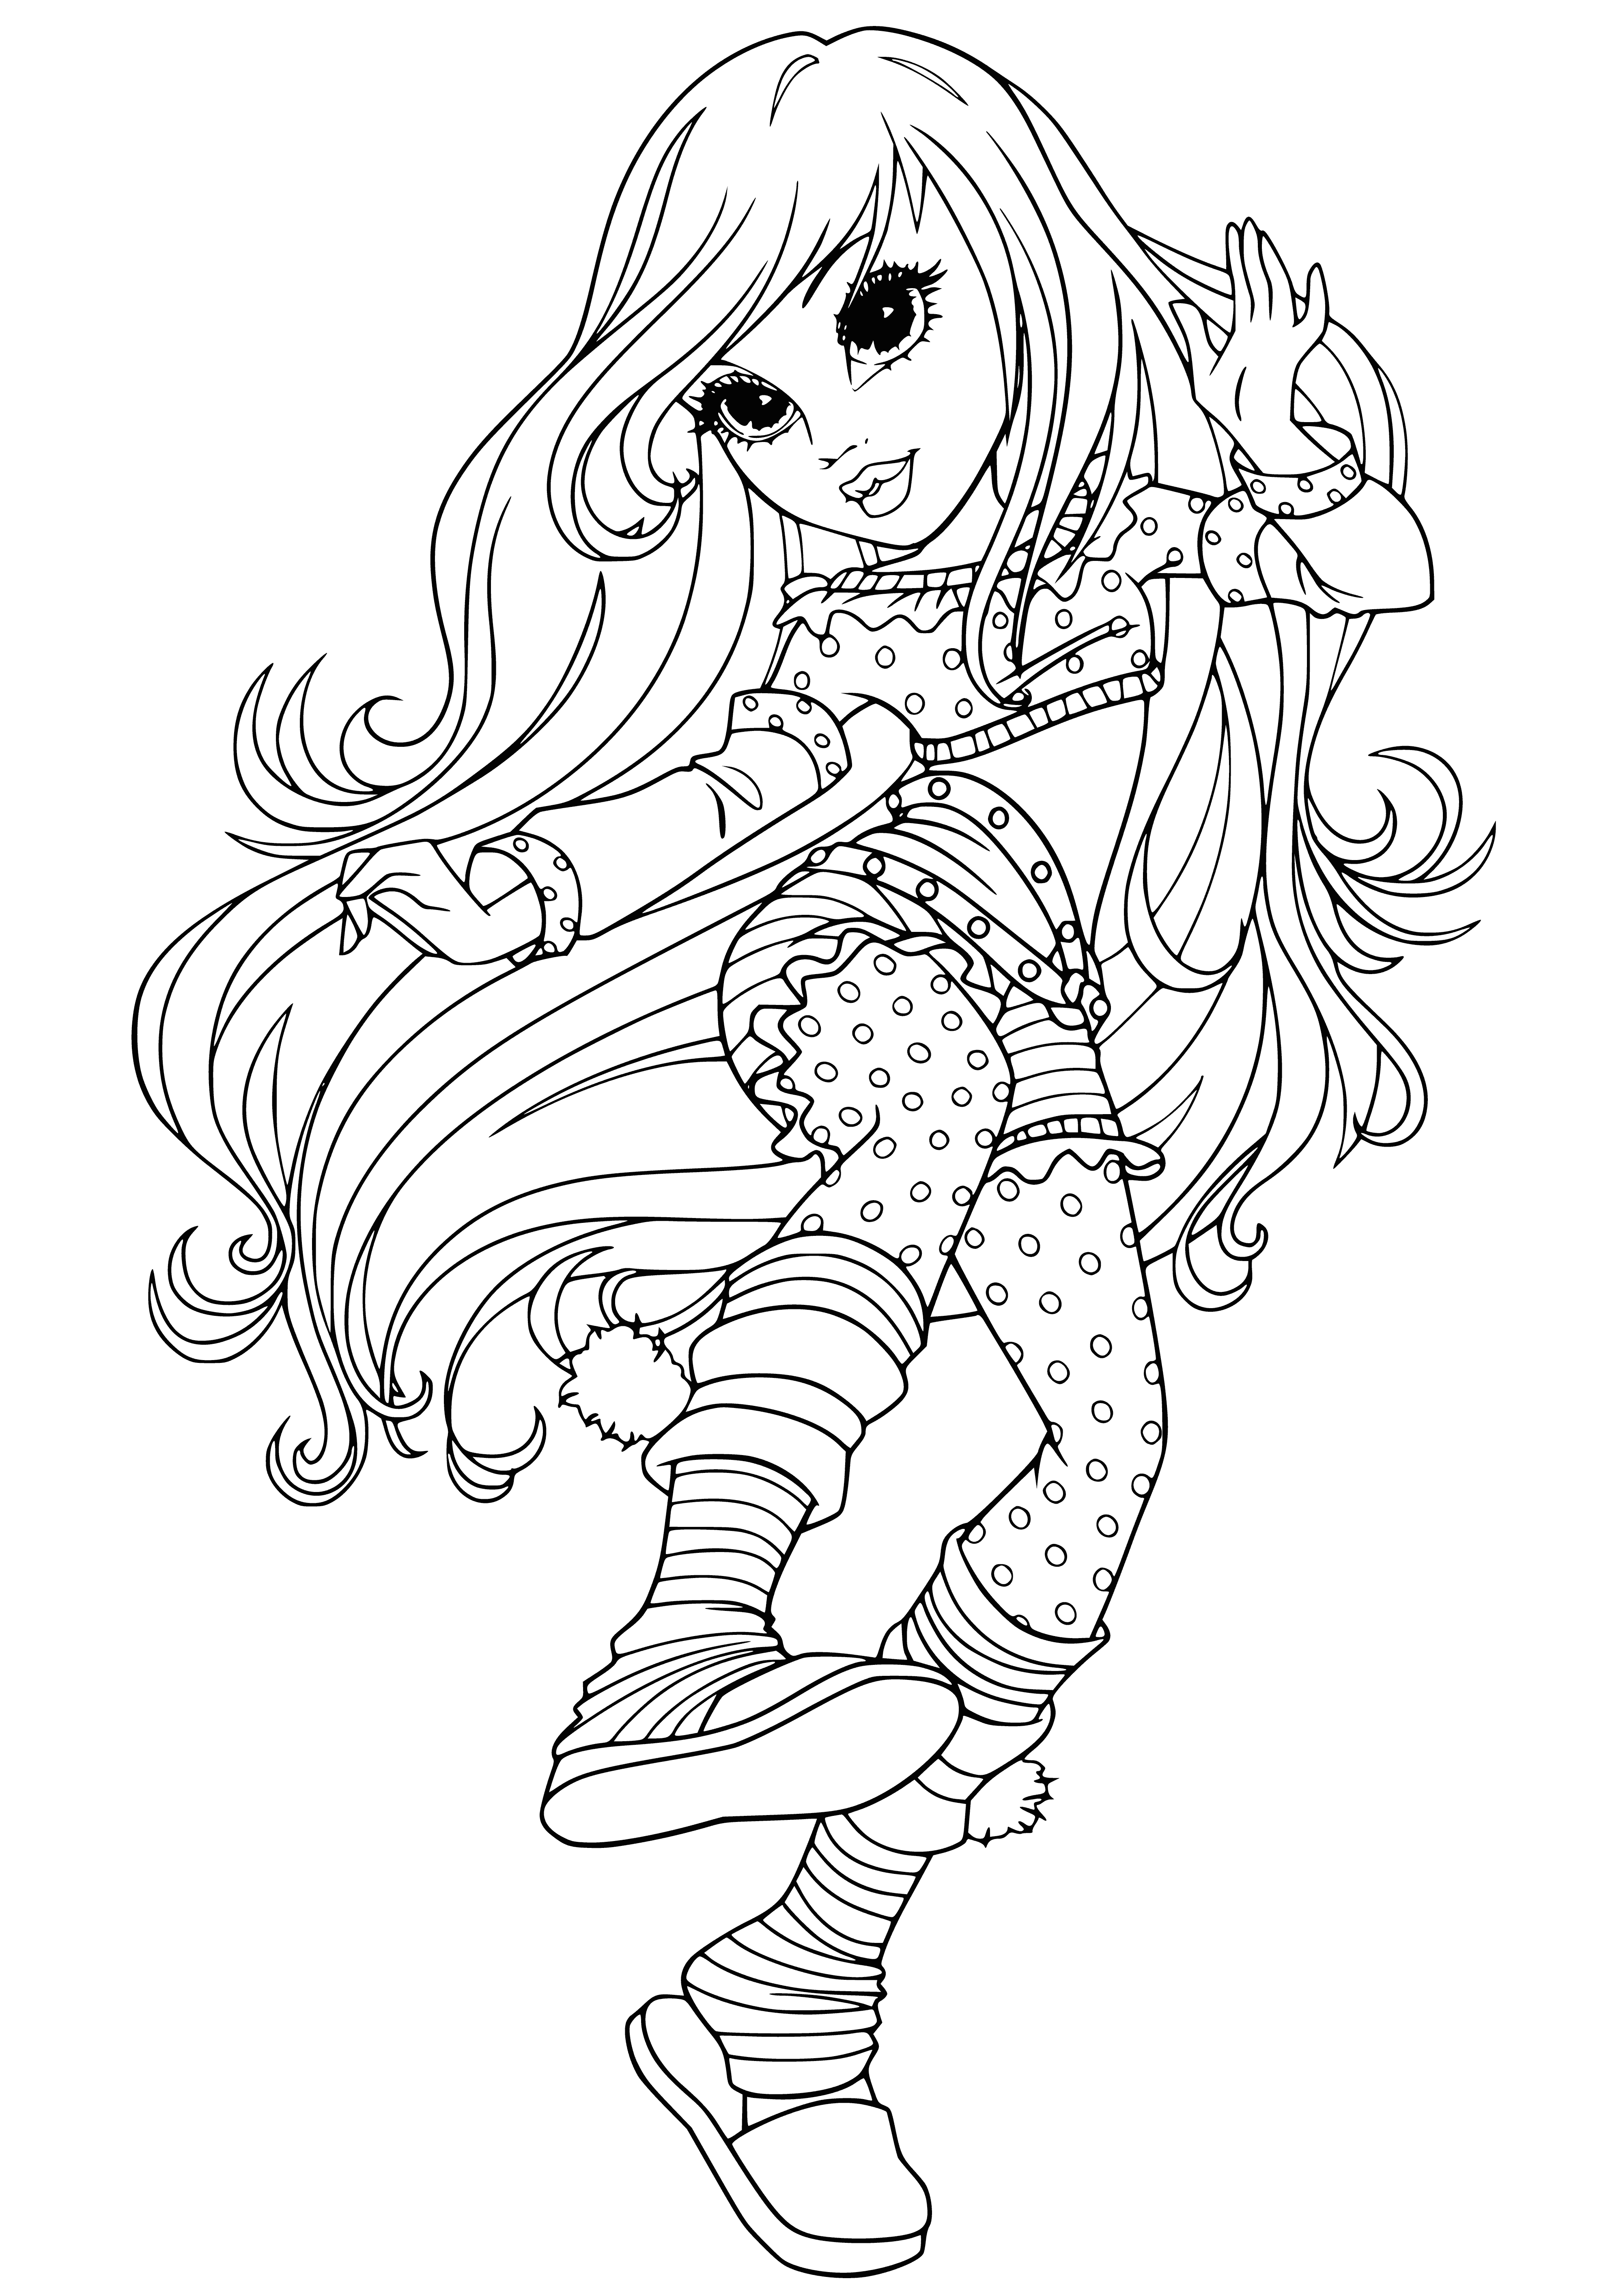 coloring page: Formerly happy, Lexa is now a nihilistic, independent risk-taker after a car accident killed her parents.